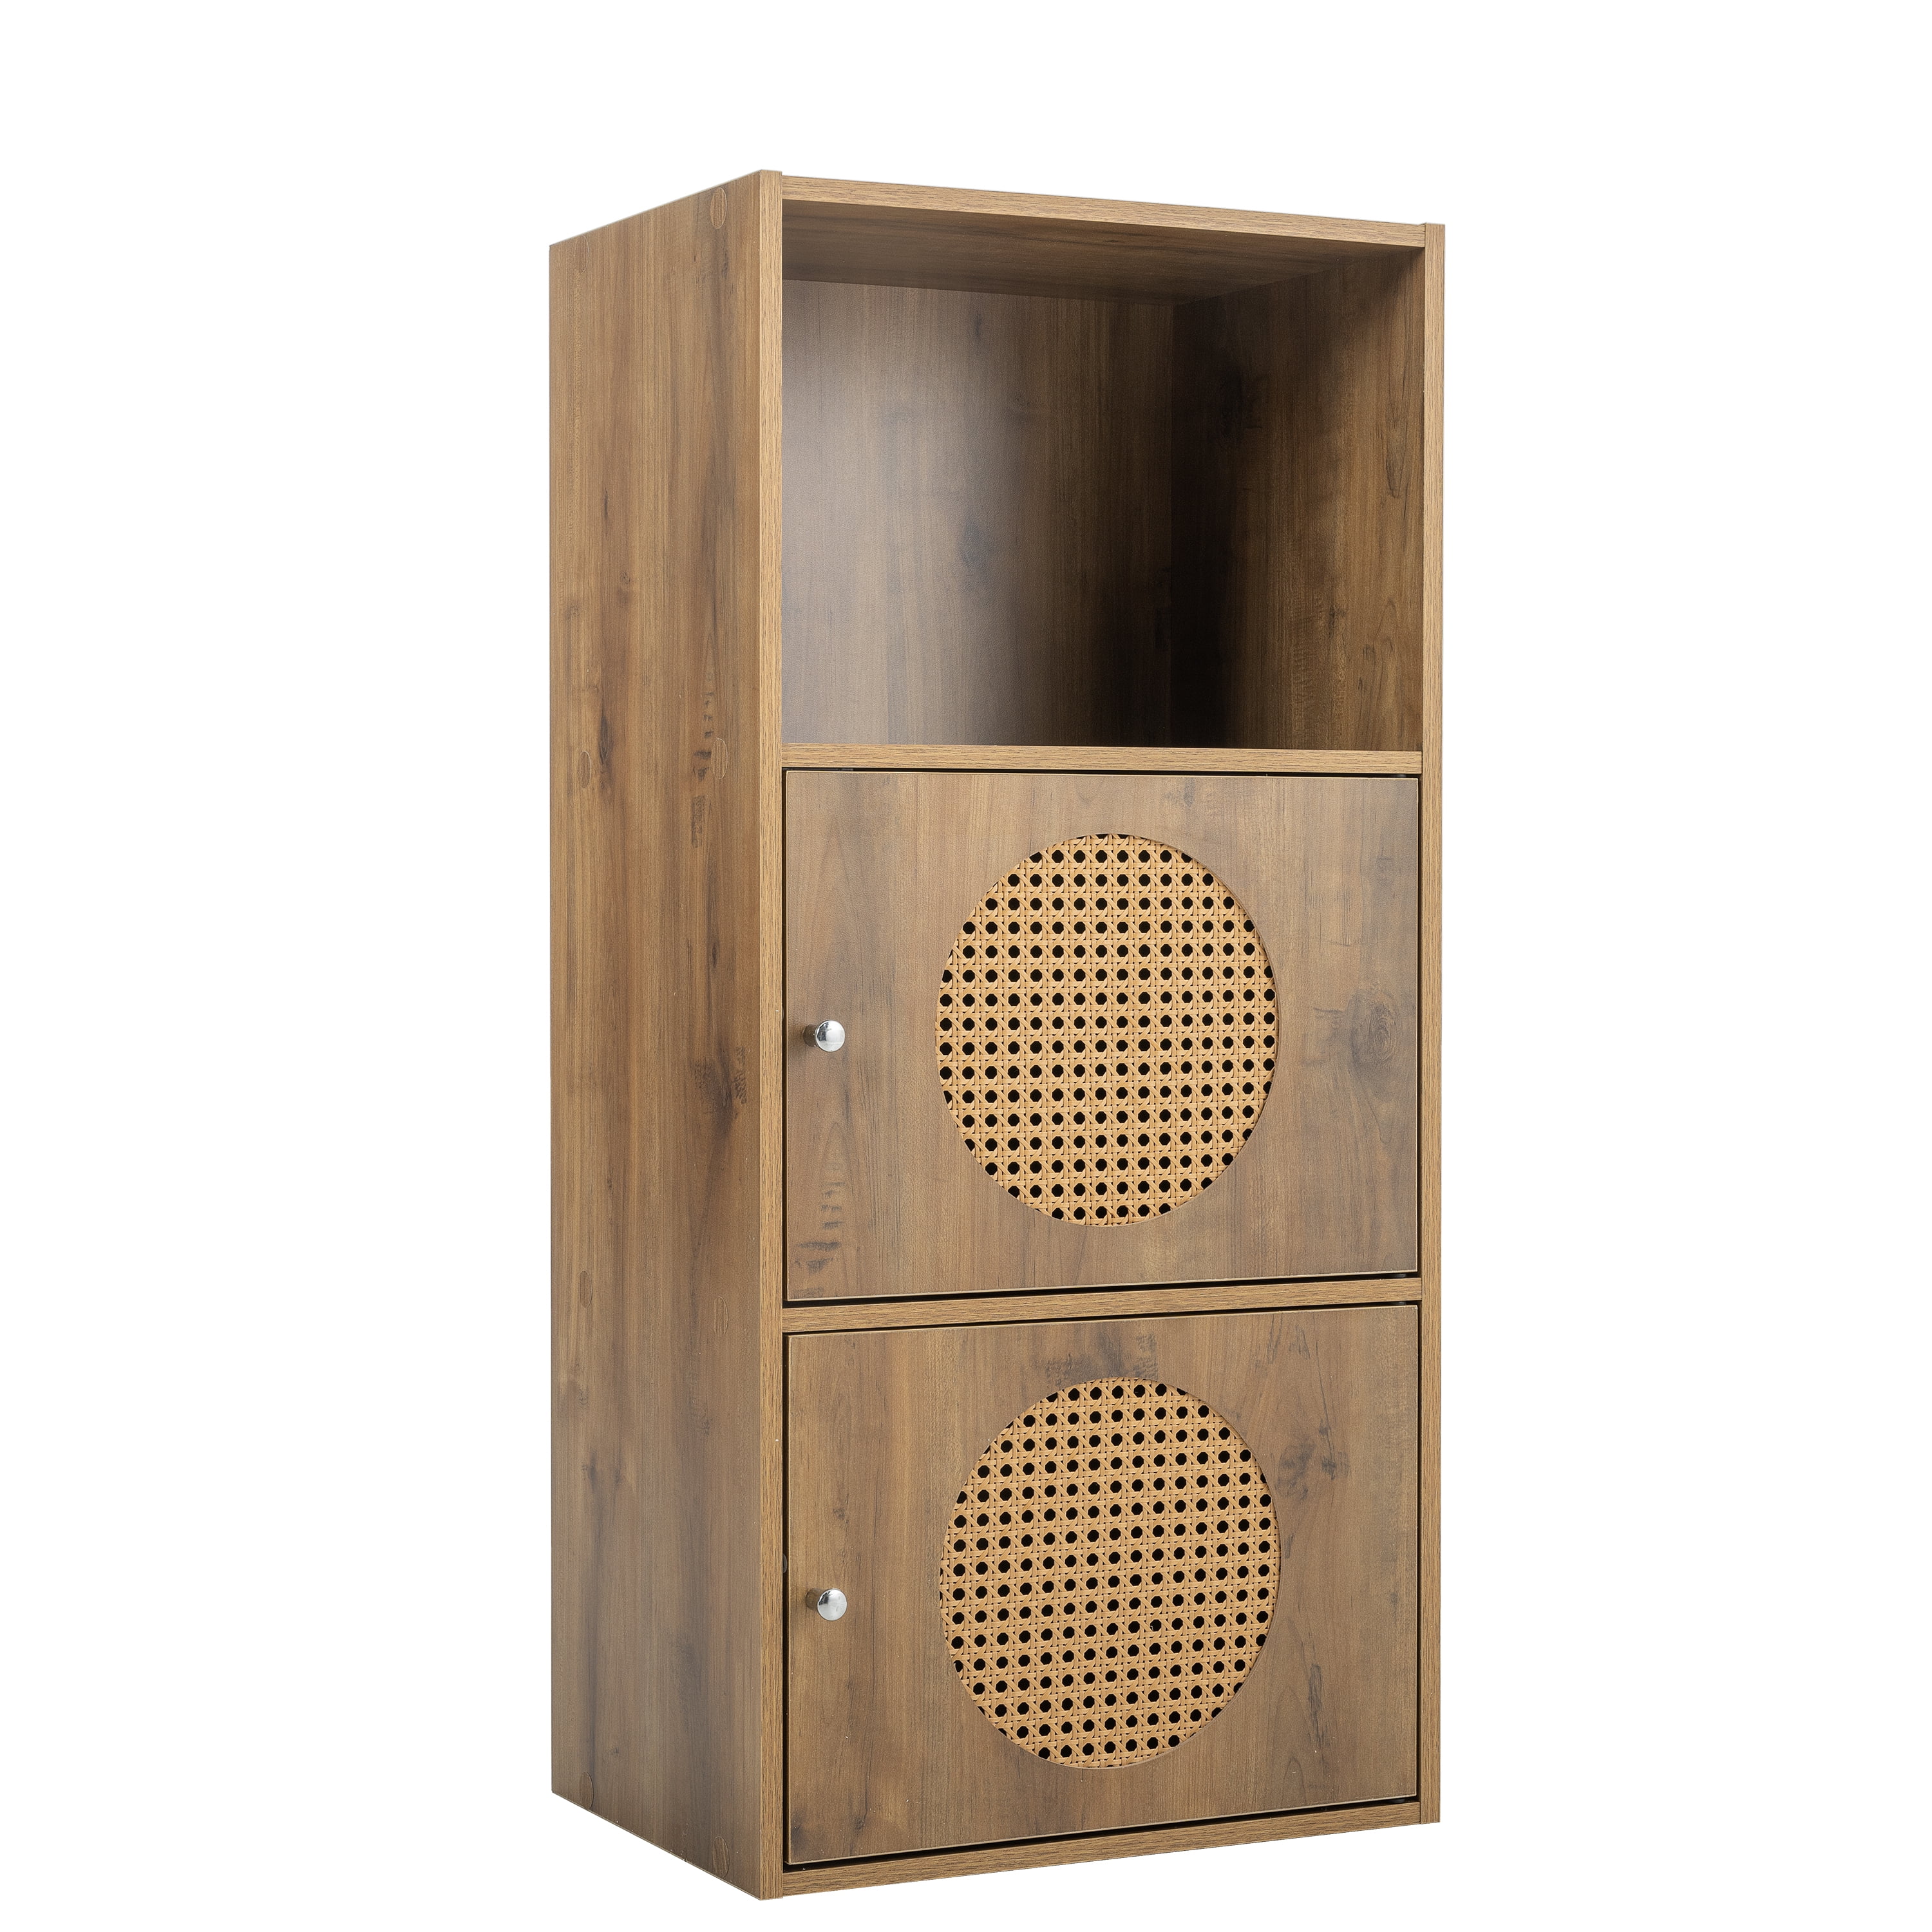 Dropship Bathroom Storage Cabinet,small Storage Cabinet,ratten Locker, 1  Door Cabinet,living Room, Bedroom, Home Office Floor Cabinet, Rustic Brown  to Sell Online at a Lower Price